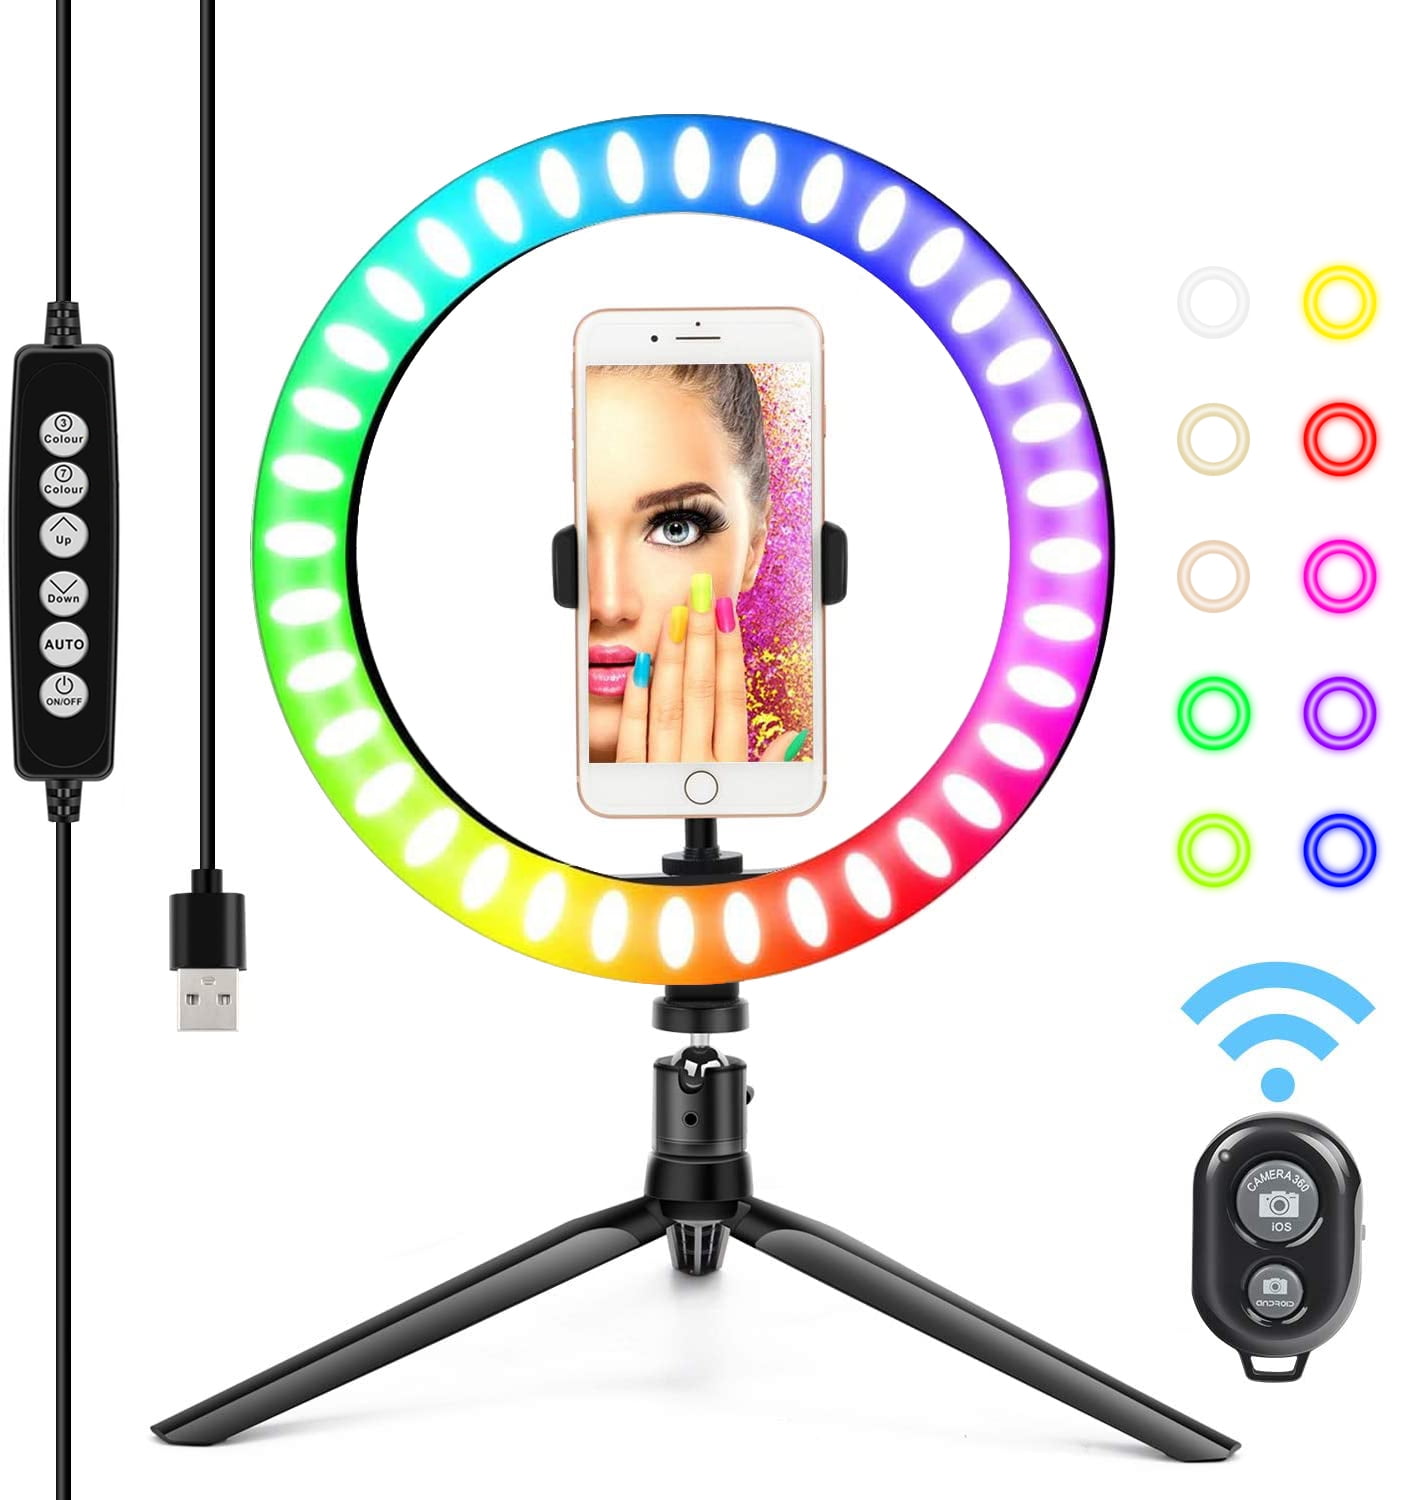 Black Fish Upgraded Mini Selfie LED Ring Light with Adjustable Tripod Cell Phone Holder,Dimmable Rechargeable Clip On Phone LED Lamp for TikTok,YouTube Video,Live Stream,Vlog,Zoom,Photography,Makeup 